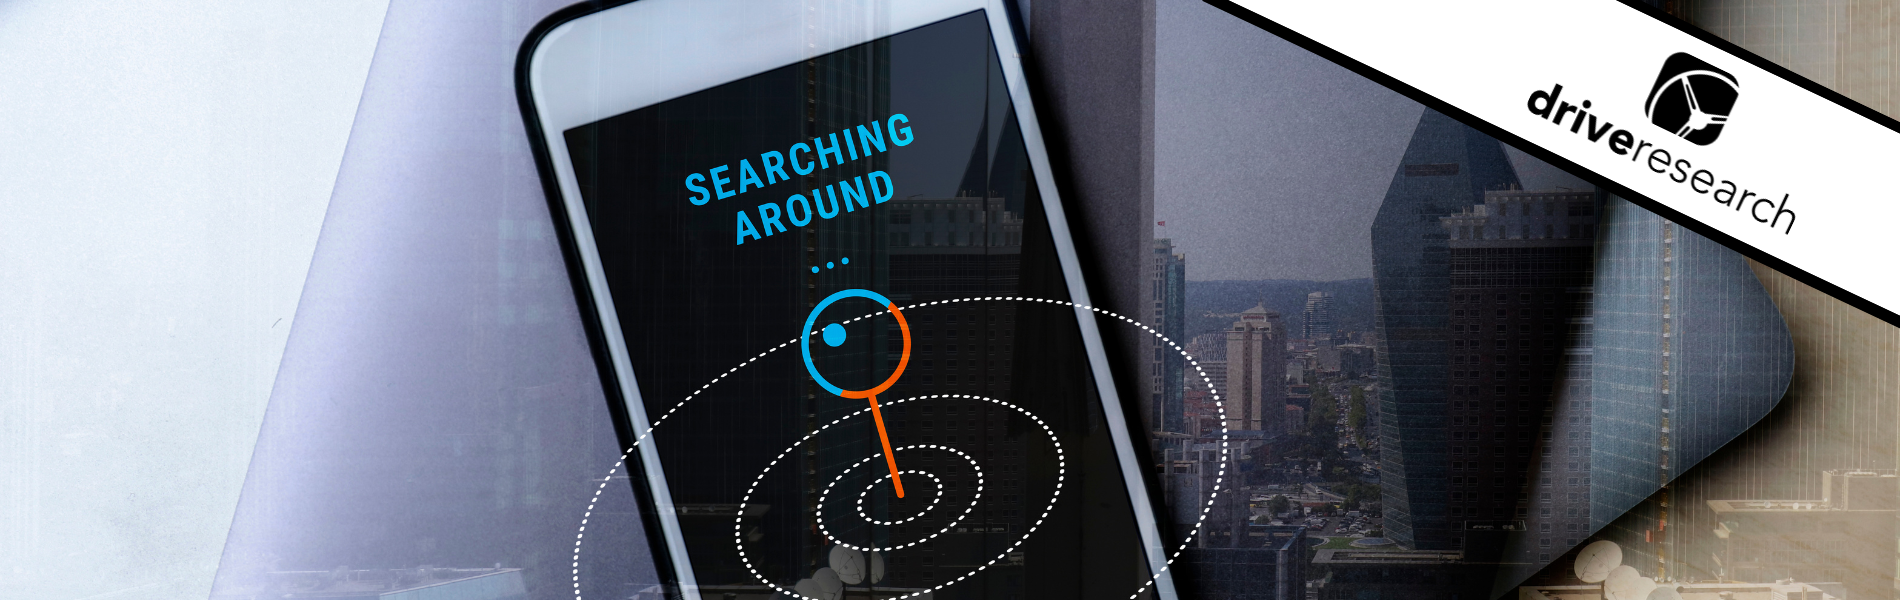 location based search